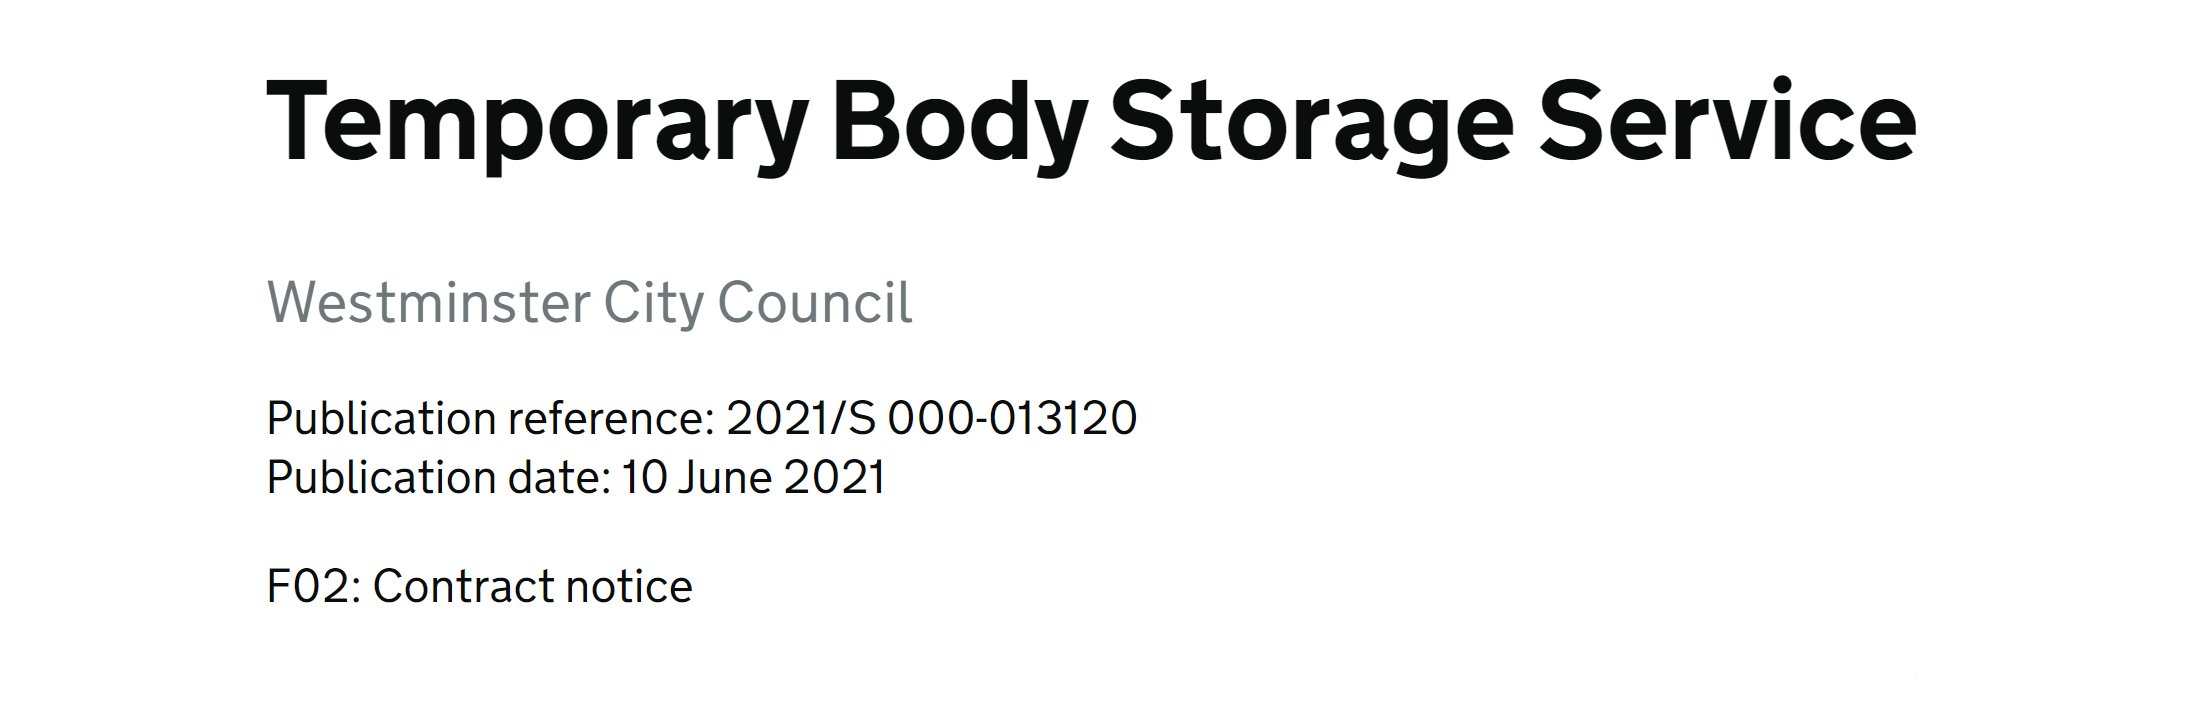 UK Lets Contract for Temporary Dead Body Storage Services "In case of excess deaths event"